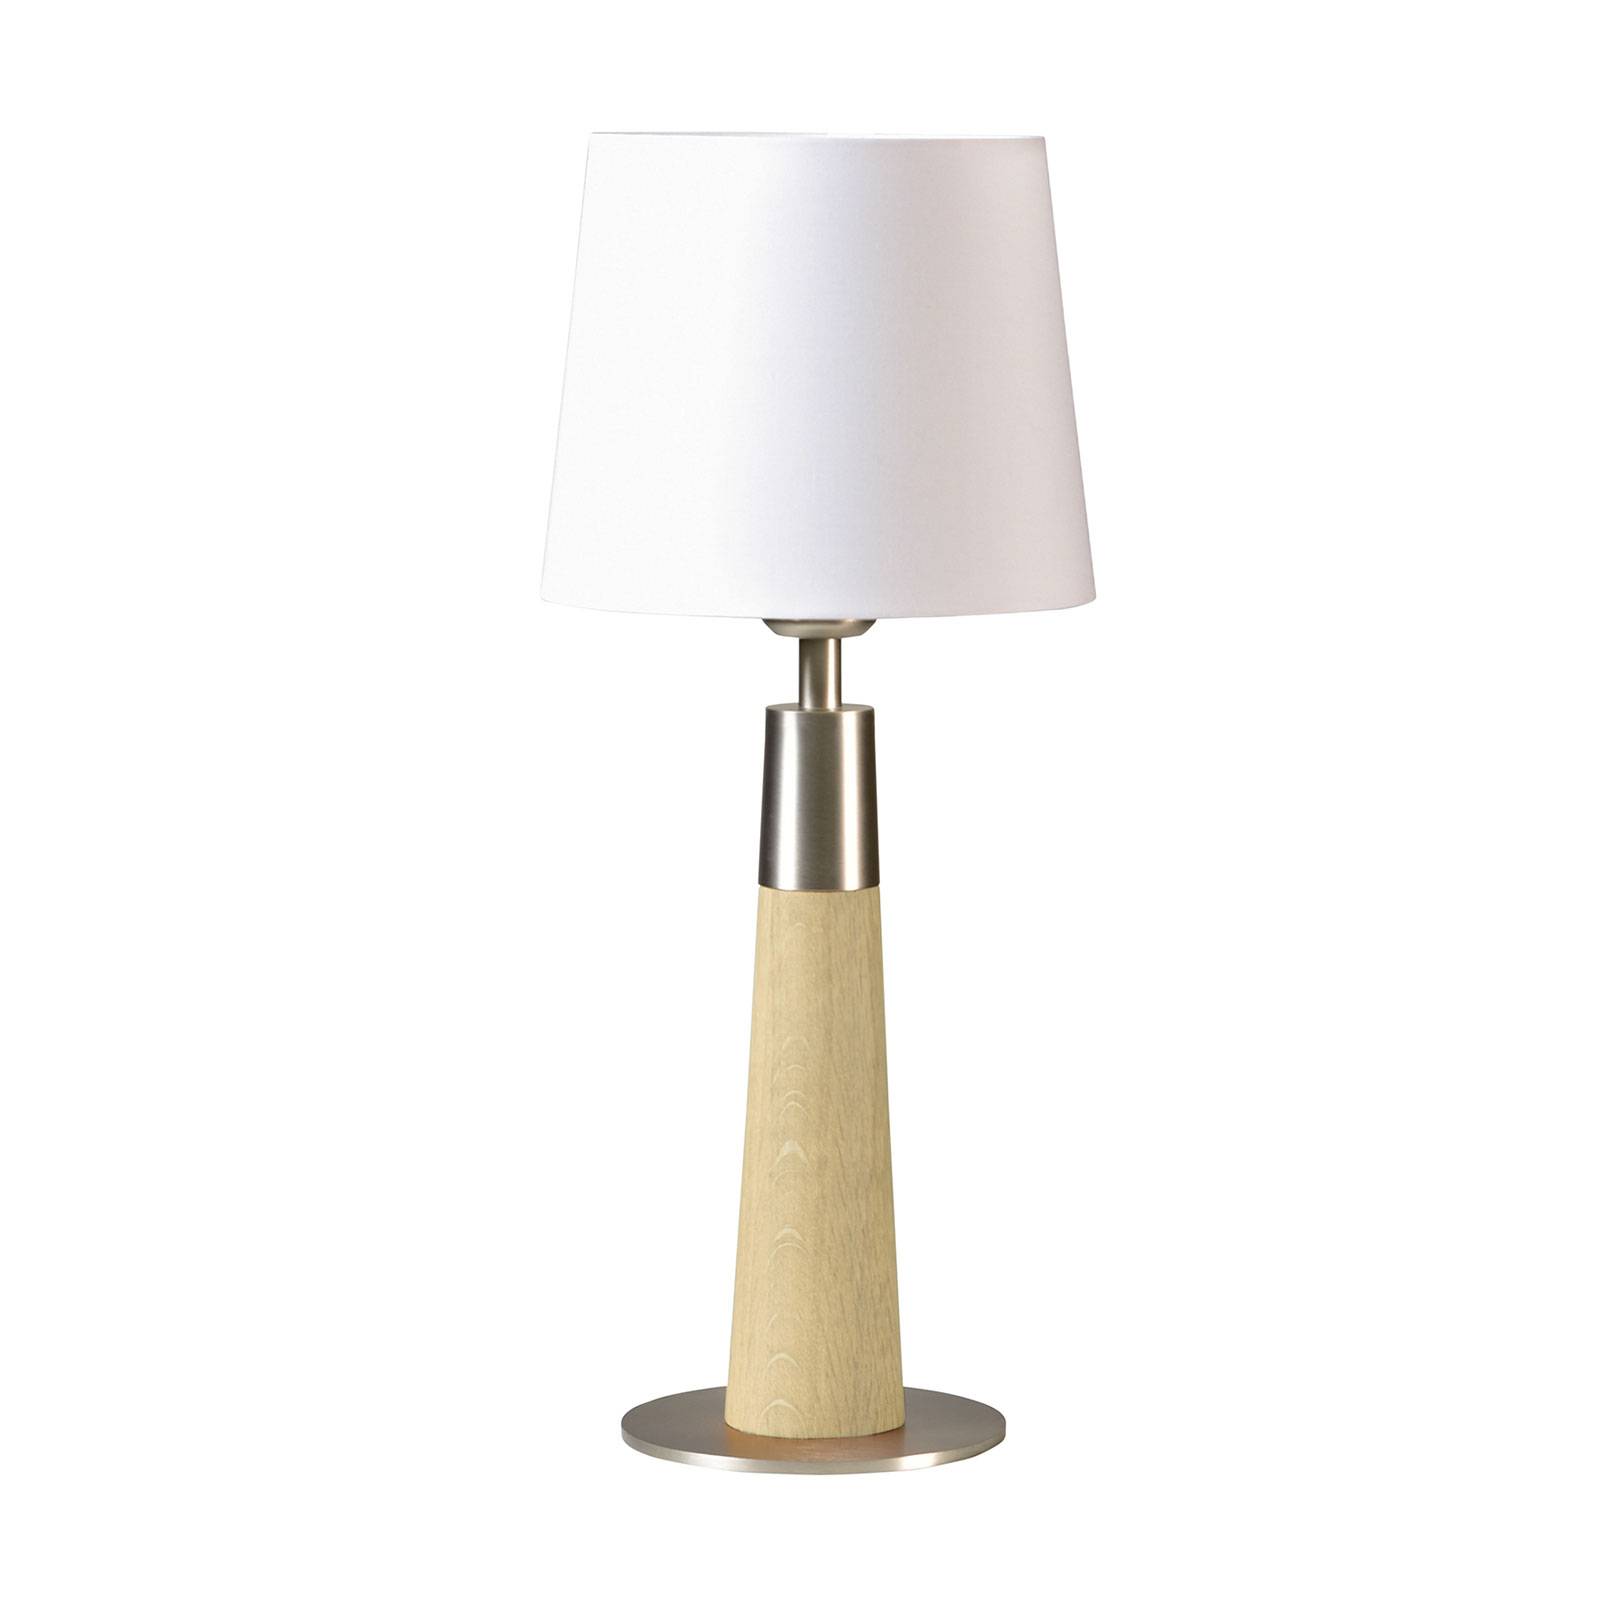 Image of HerzBlut Conico lampe table blanche chêne nat 44cm 4021273023707